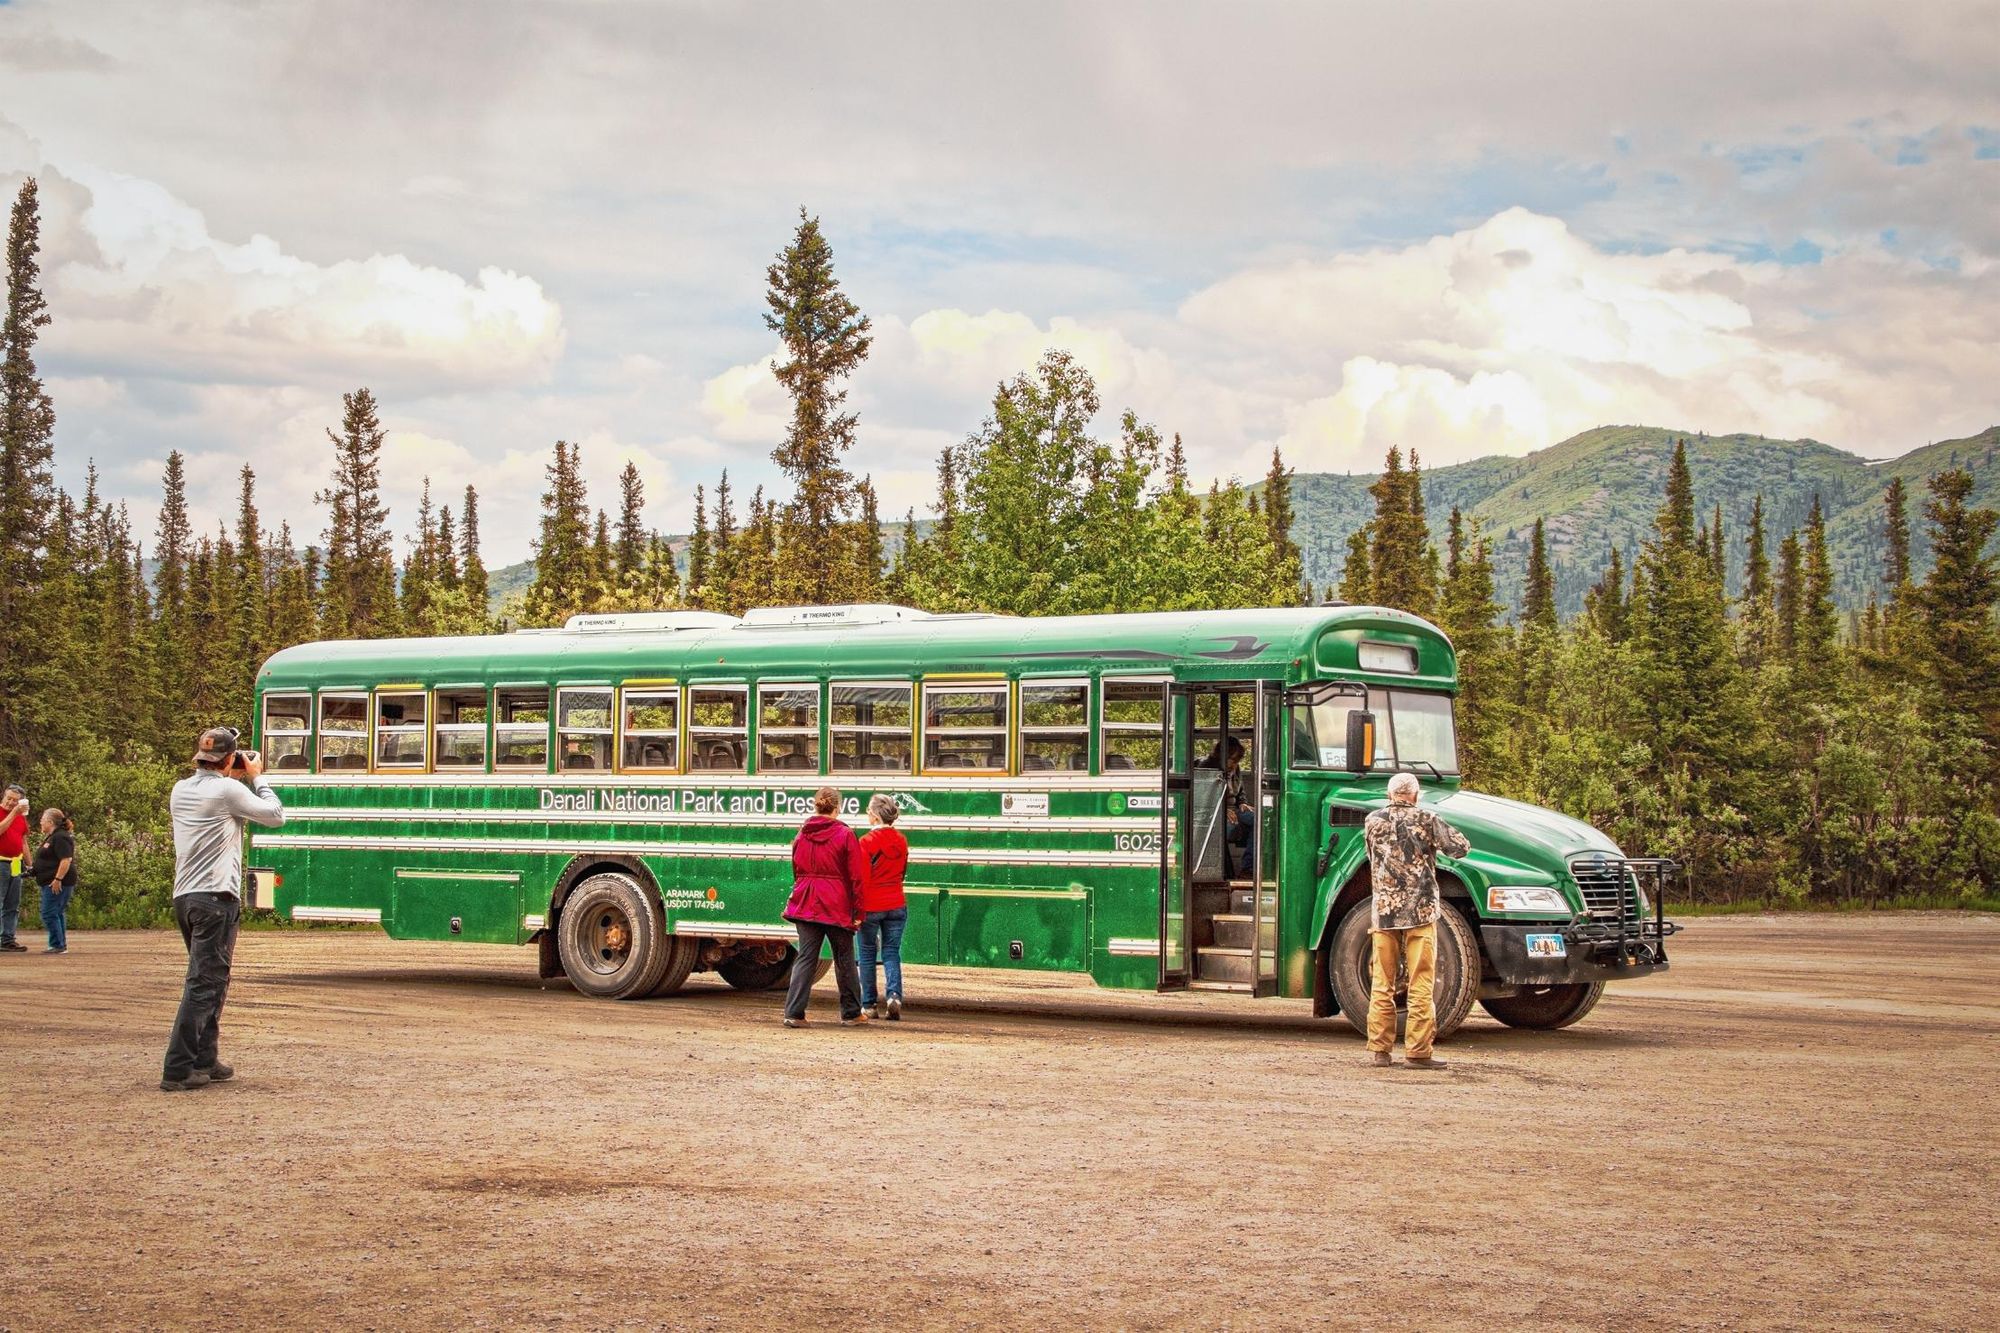 One of Denali's park buses. Photo: Shutterstock.